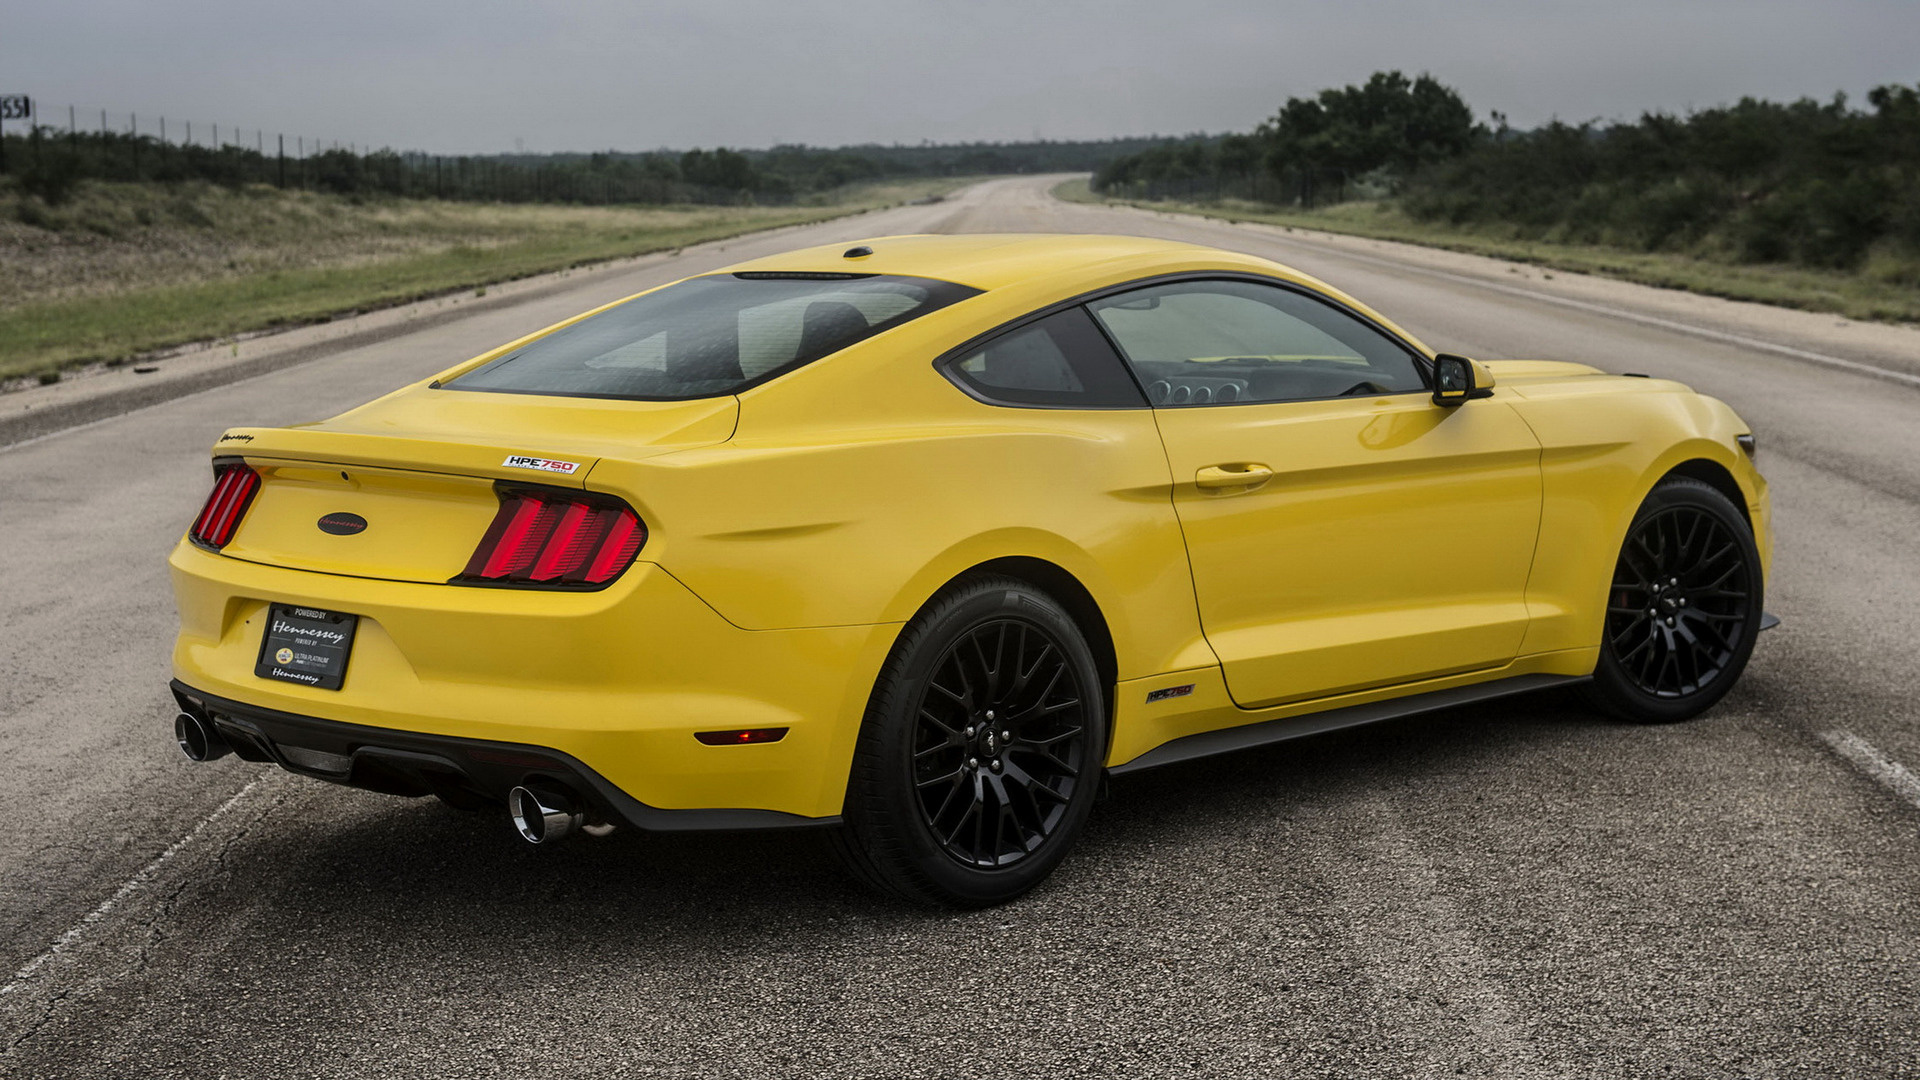 Car Coupe Hennessey Mustang Gt Muscle Car Tuning Yellow Car 1920x1080